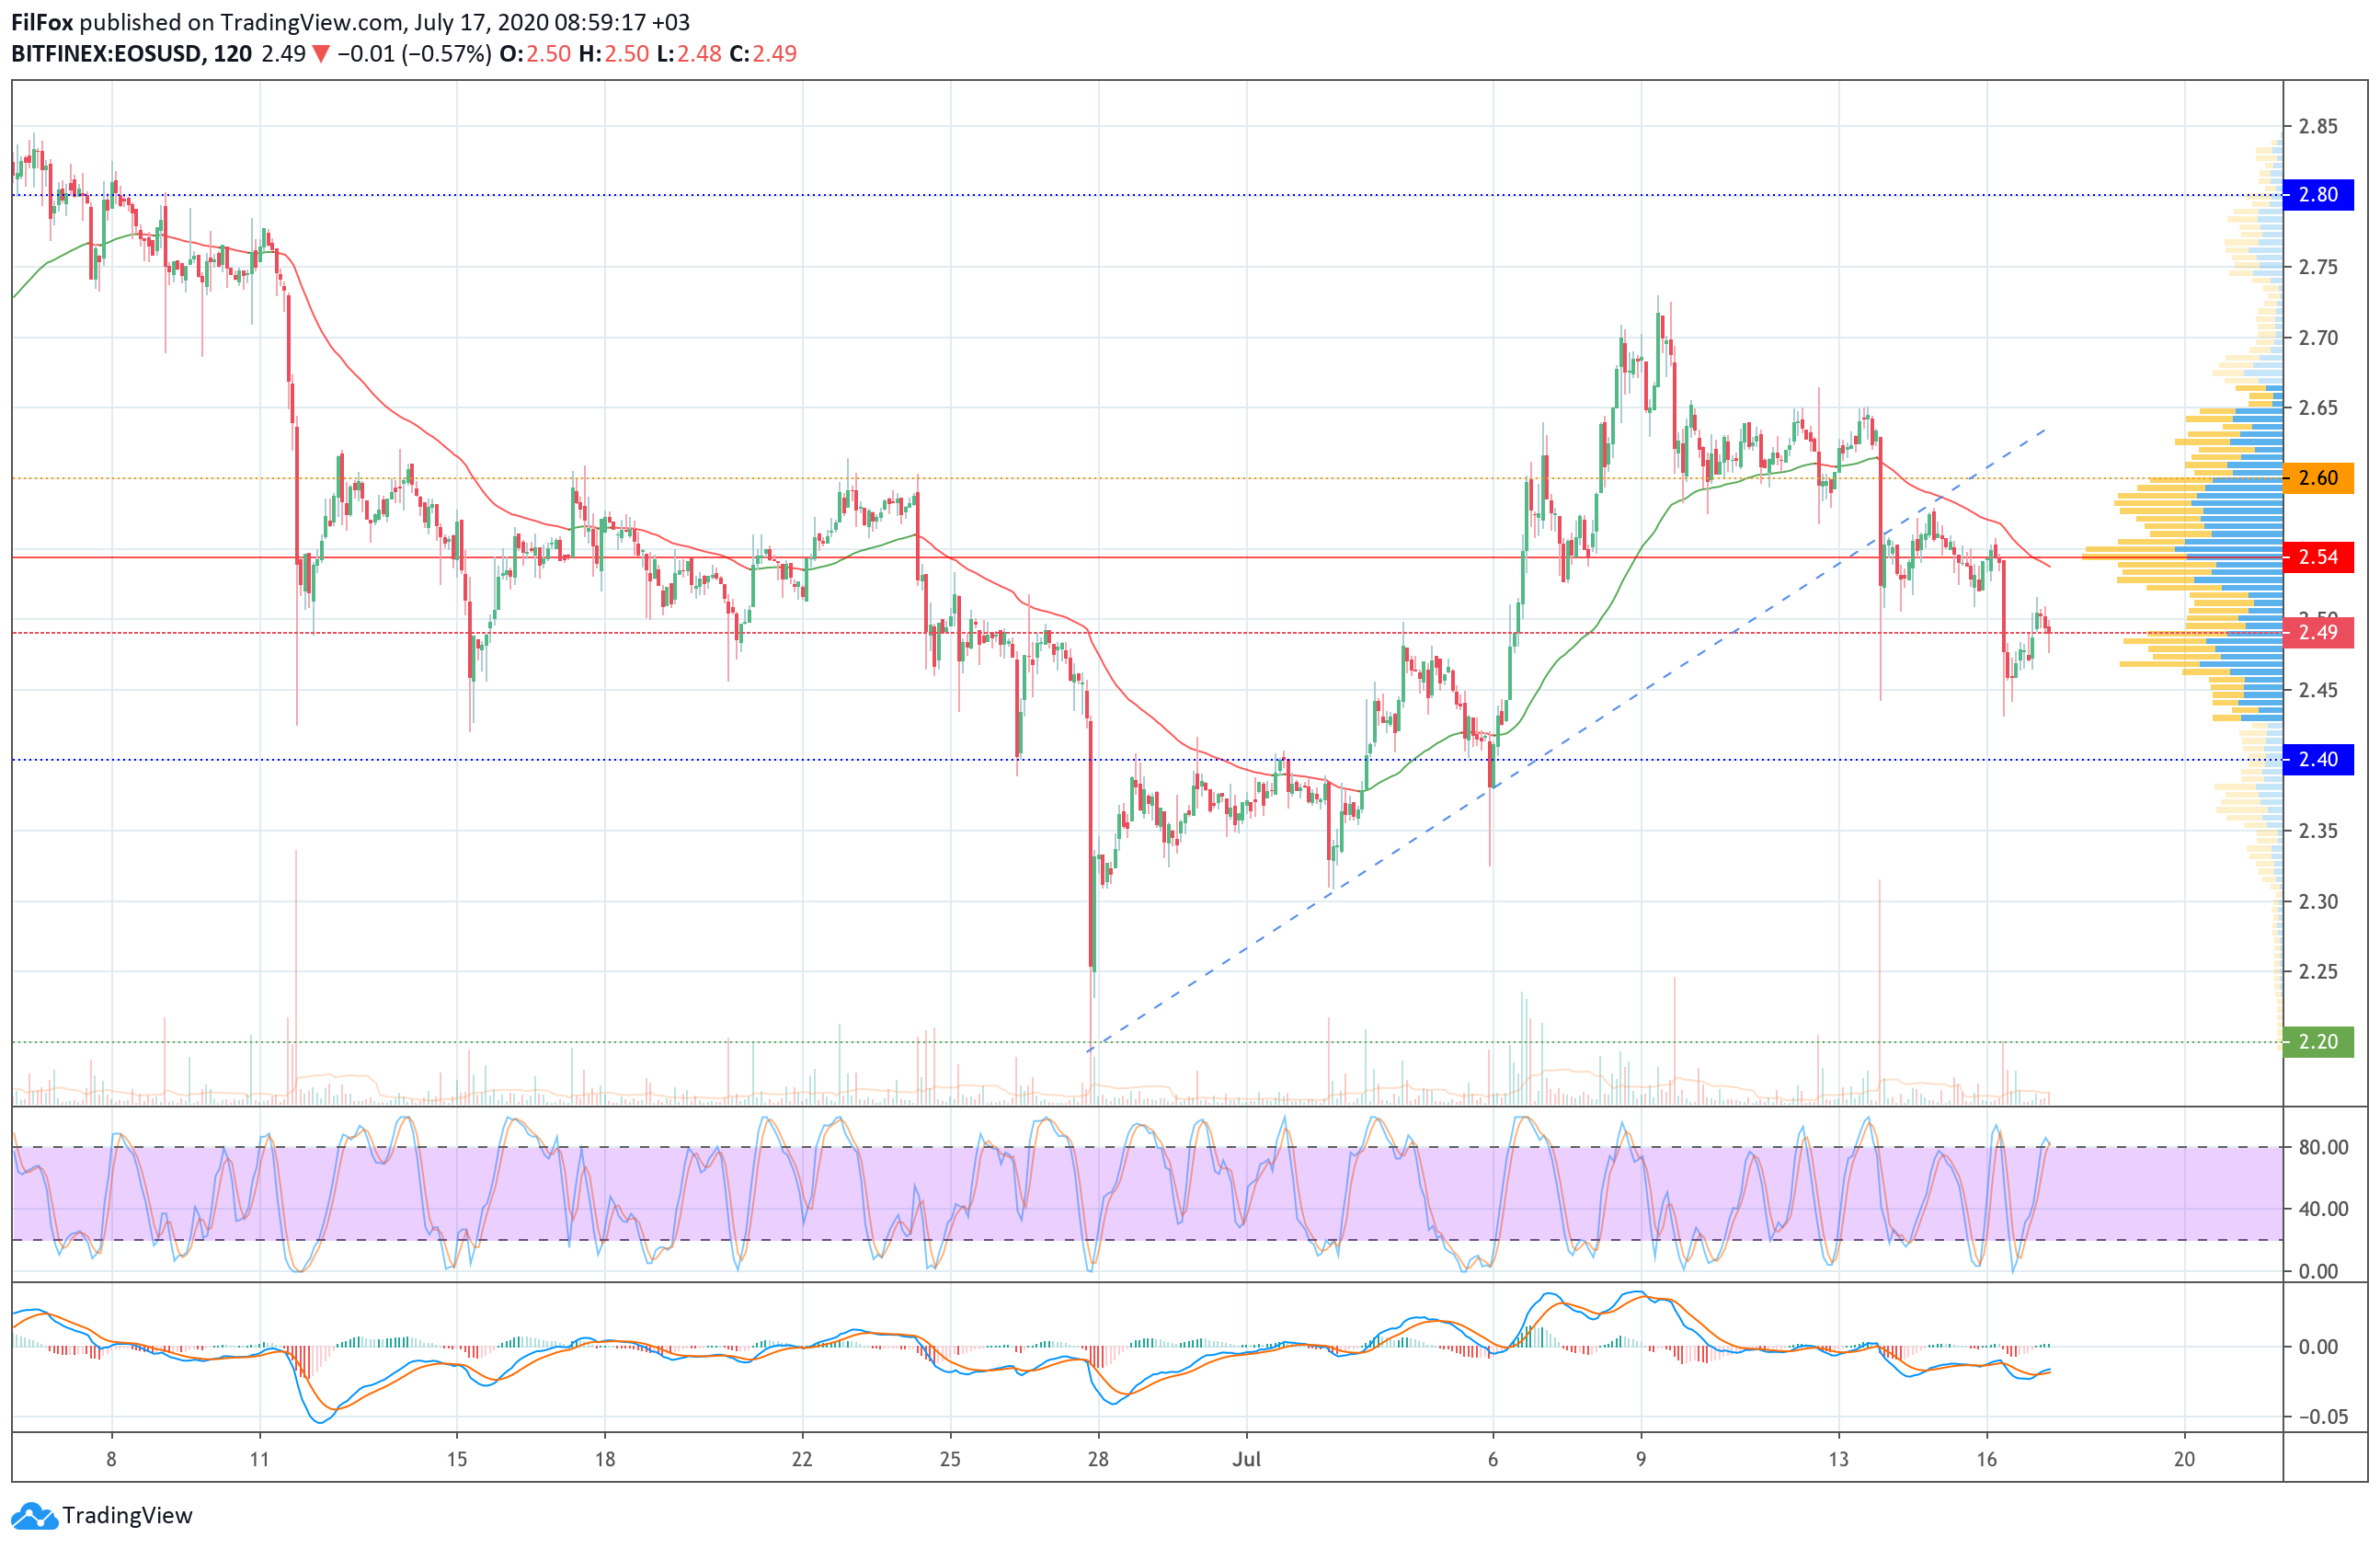 Analysis of the prices of Bitcoin Cash, Cardano, Litecoin, EOS and Stellar for 07/17/2020